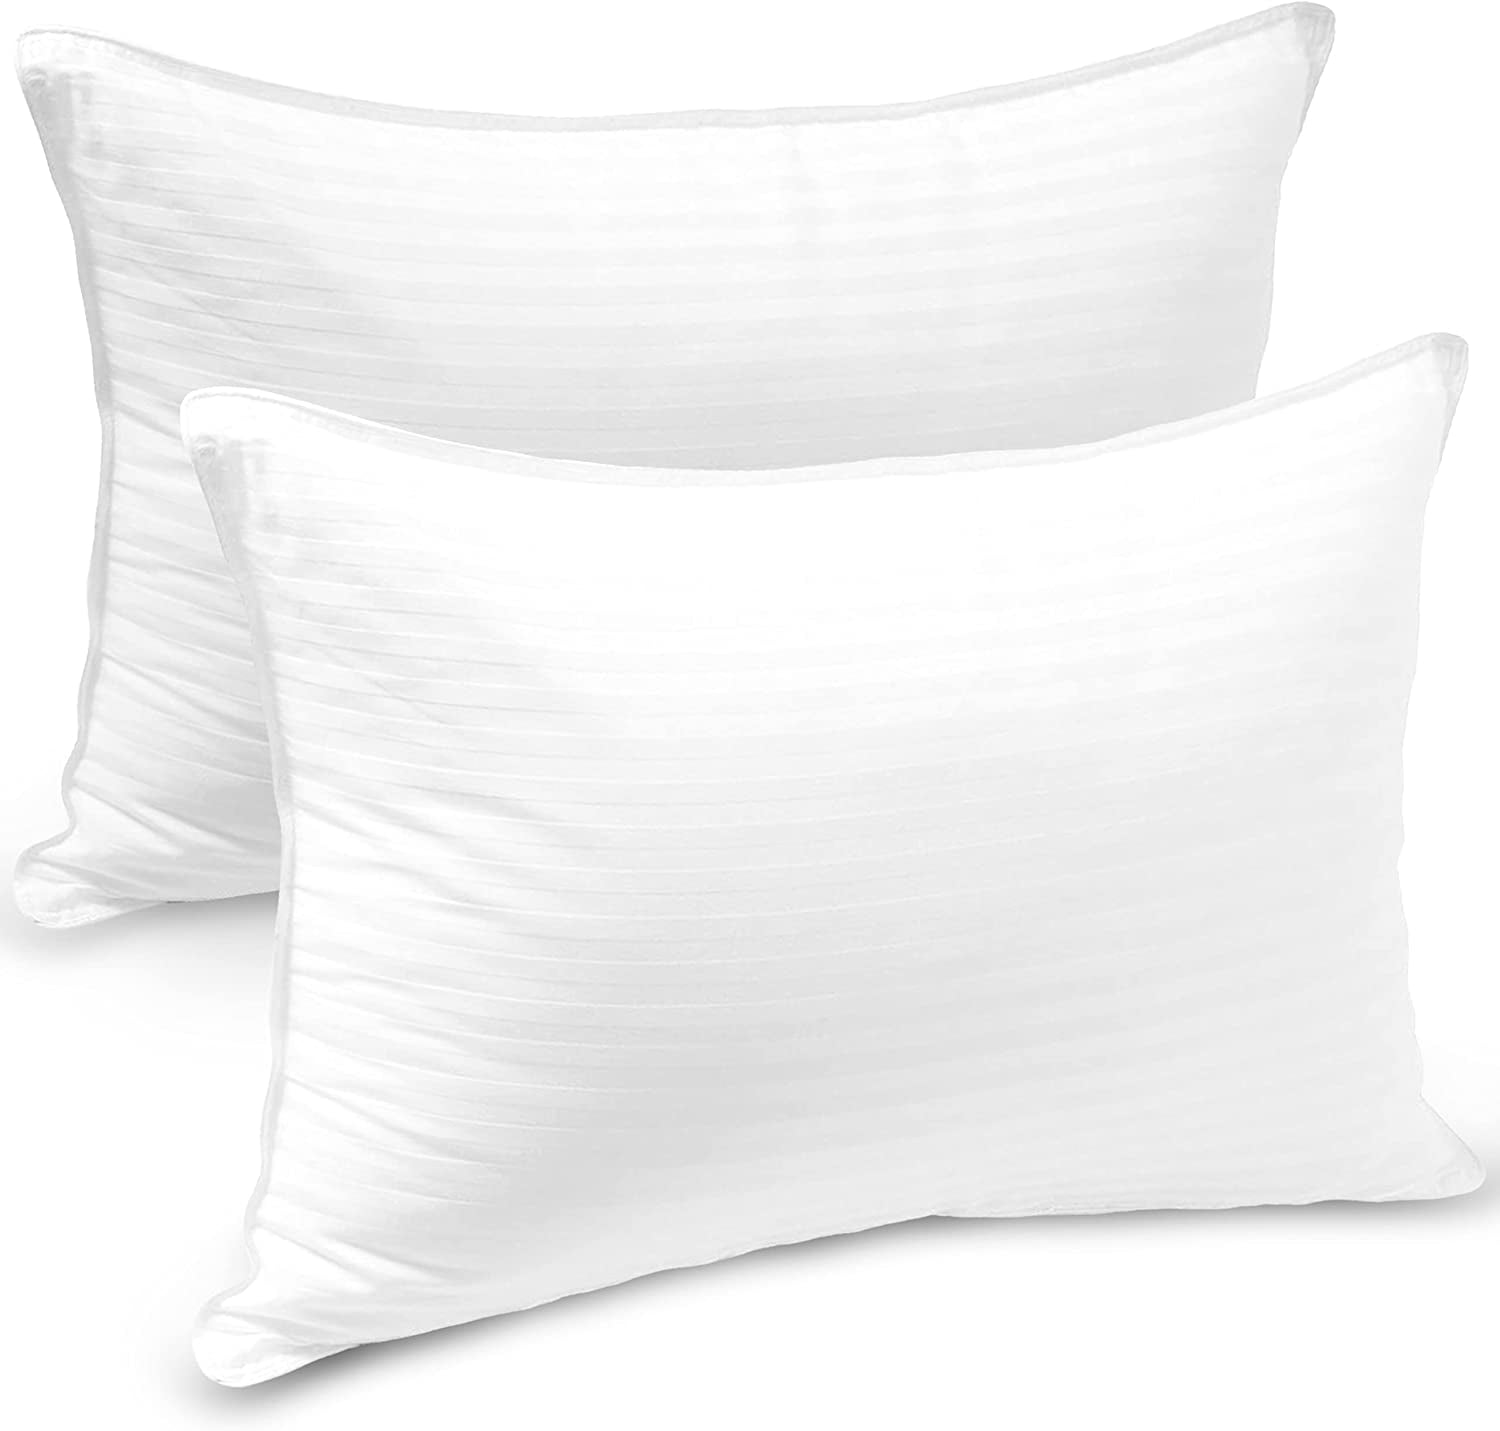 Cotton Pillows Queen King Size Luxury Ultra Soft Hotel Quality Set of 2 Pillows 